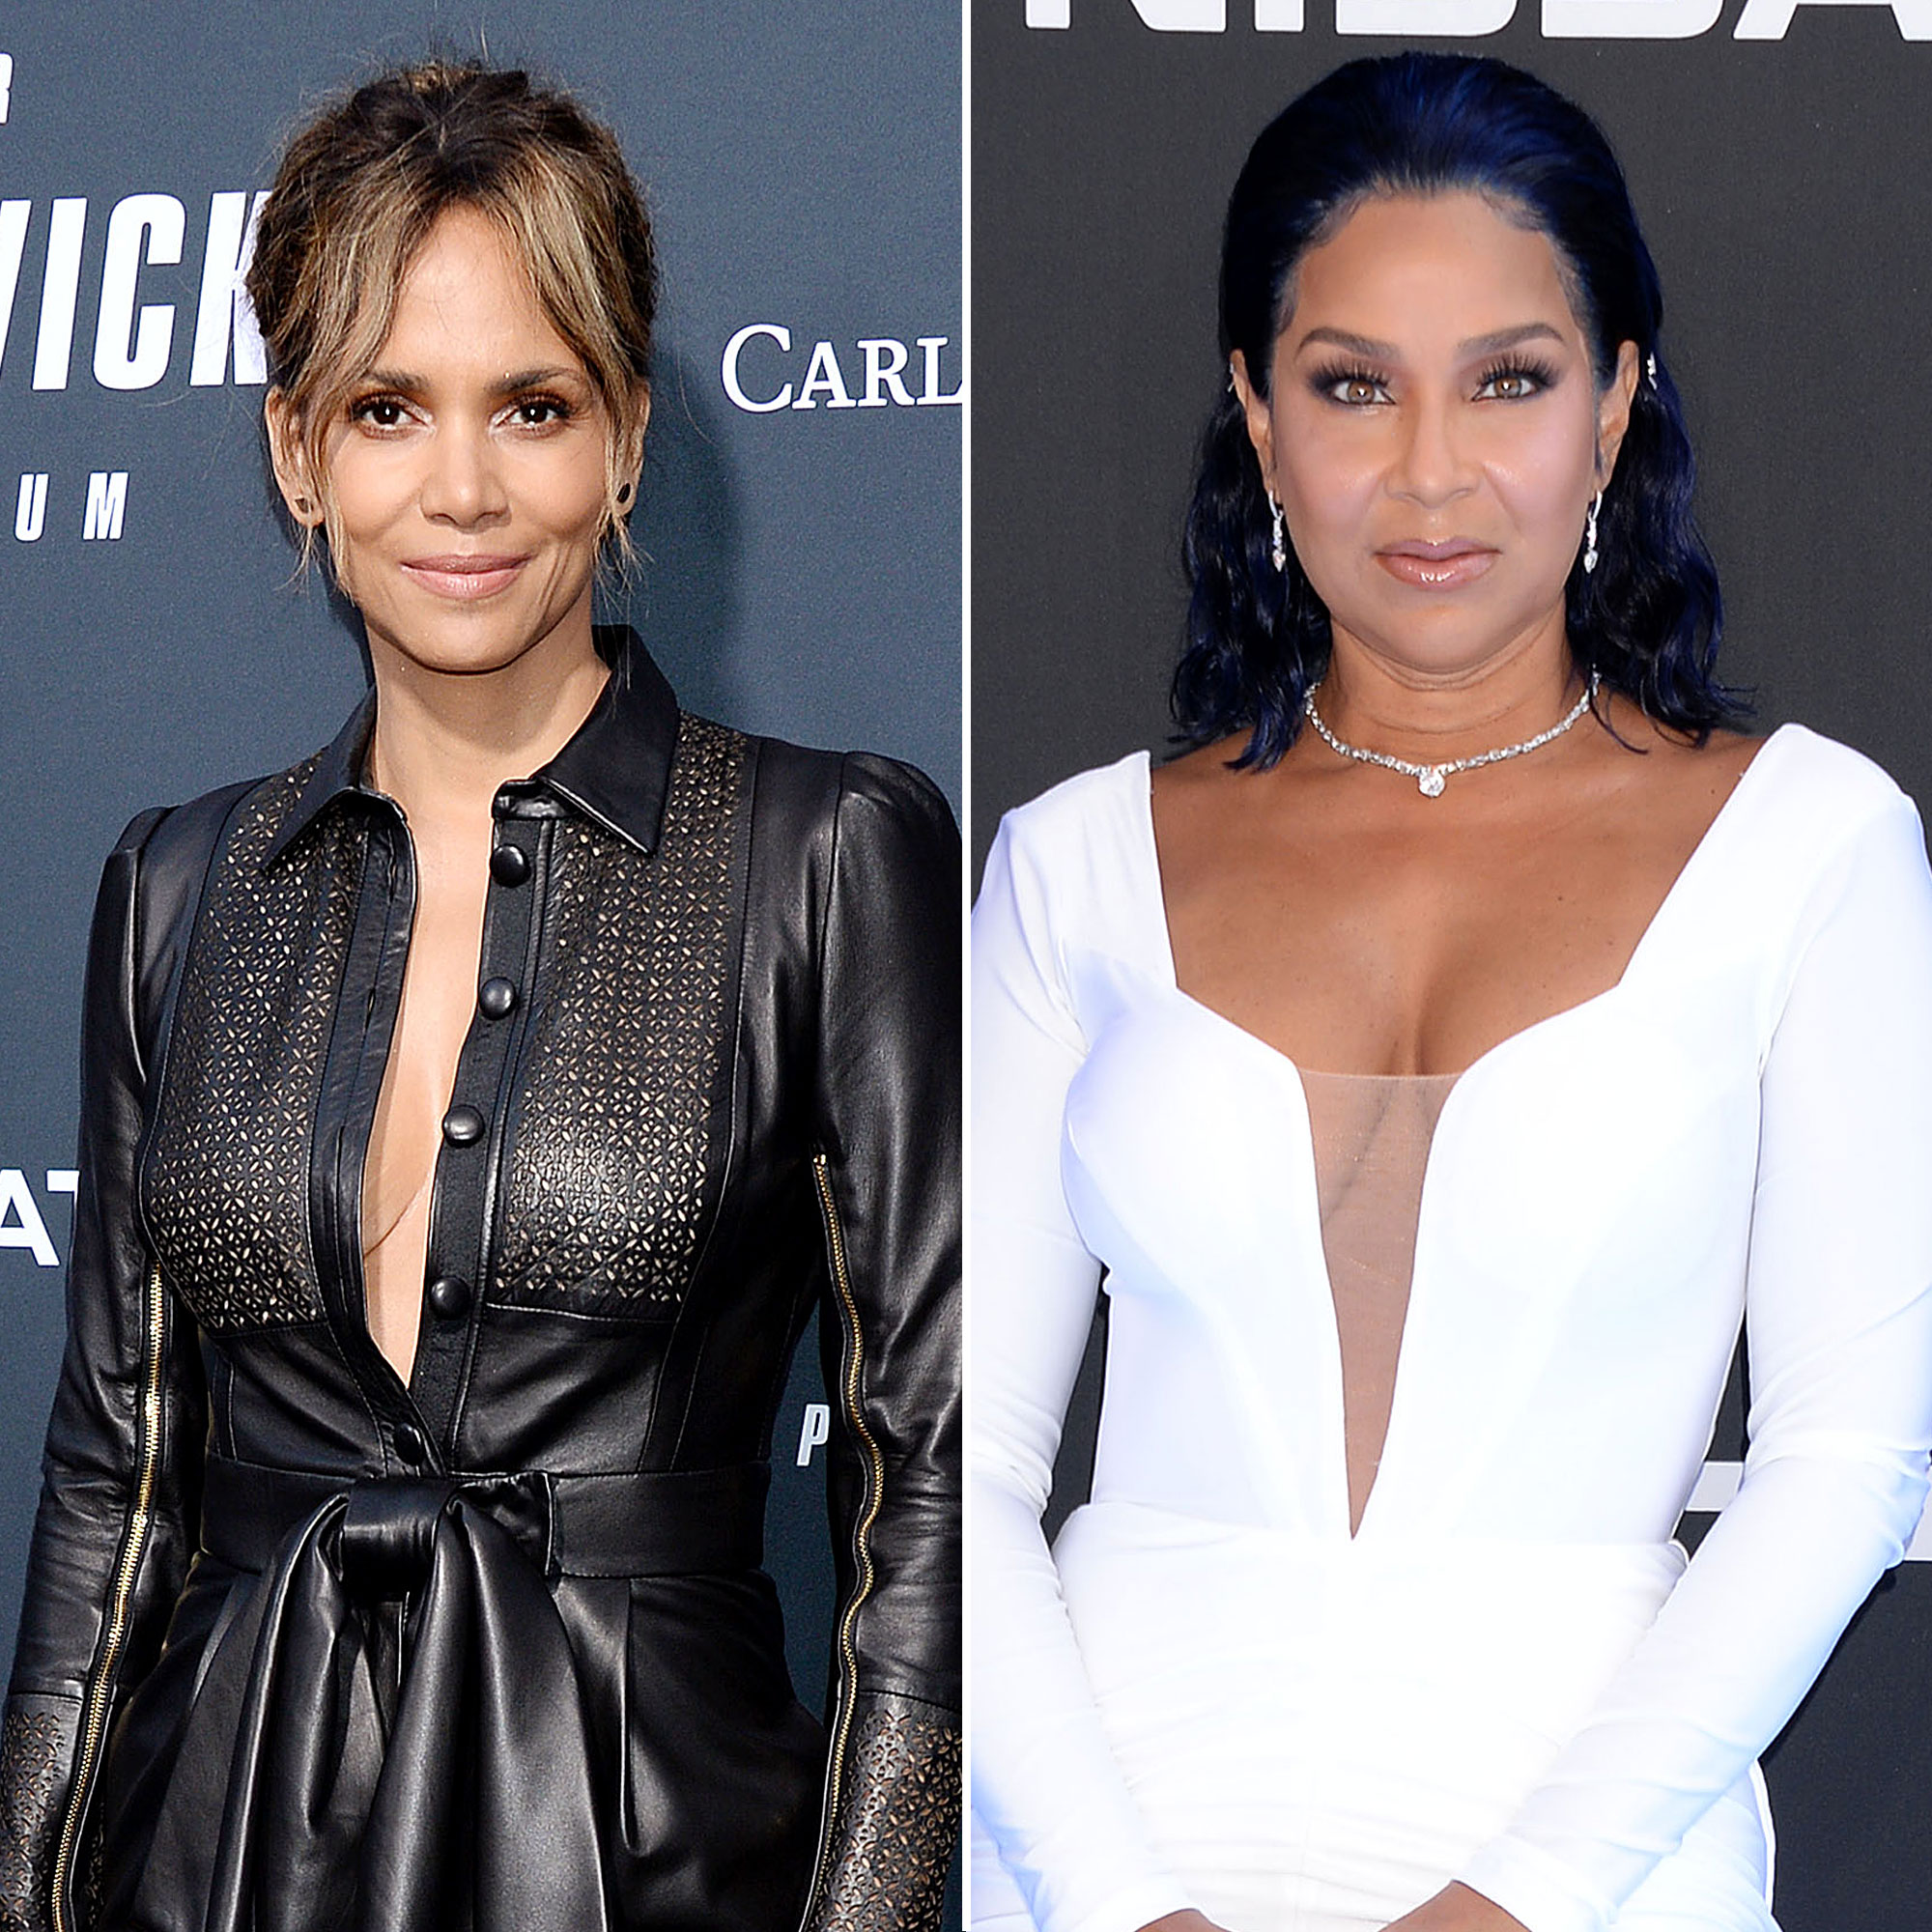 Halle Berry Fires Back at Claim That Shes Bad in pic